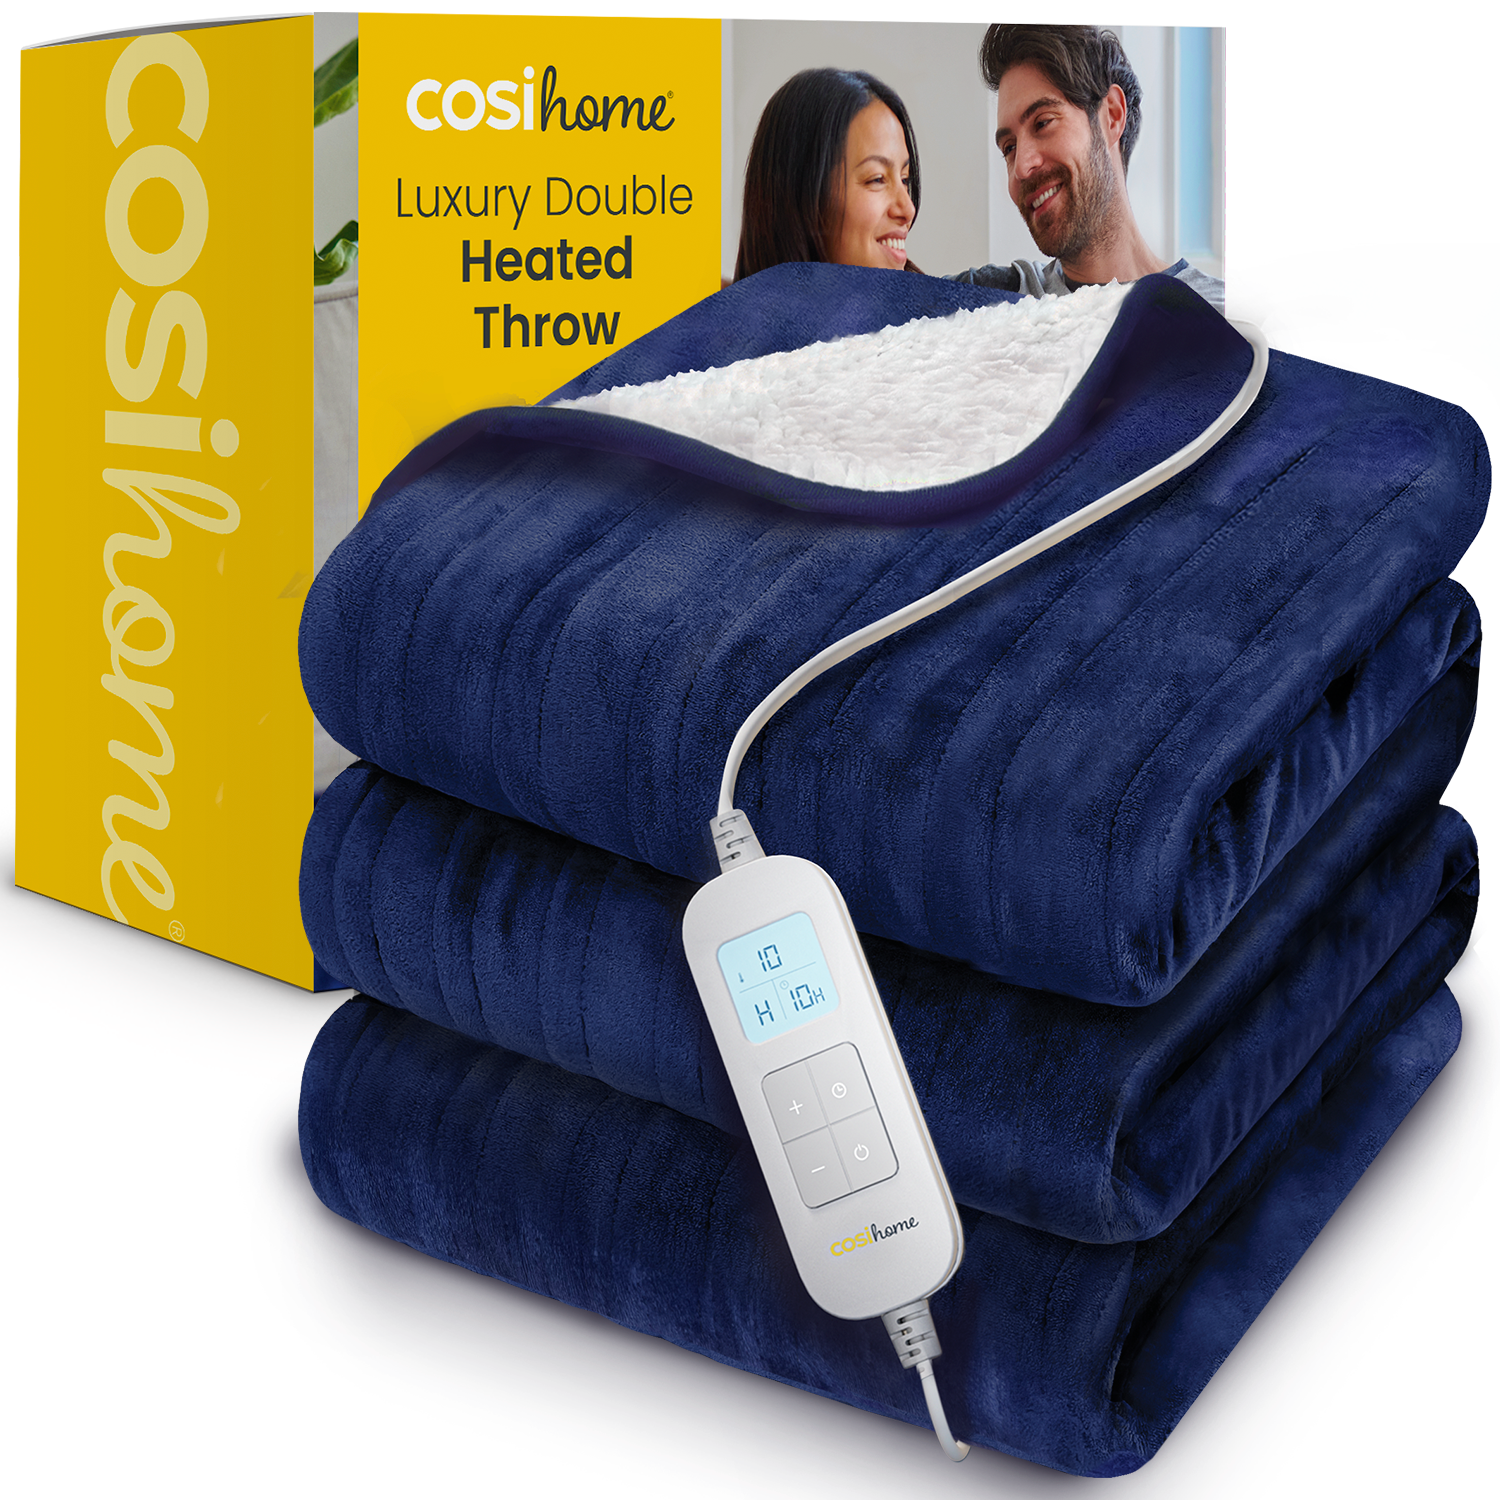 Luxurious Double Heated Throw Blanket With Timer